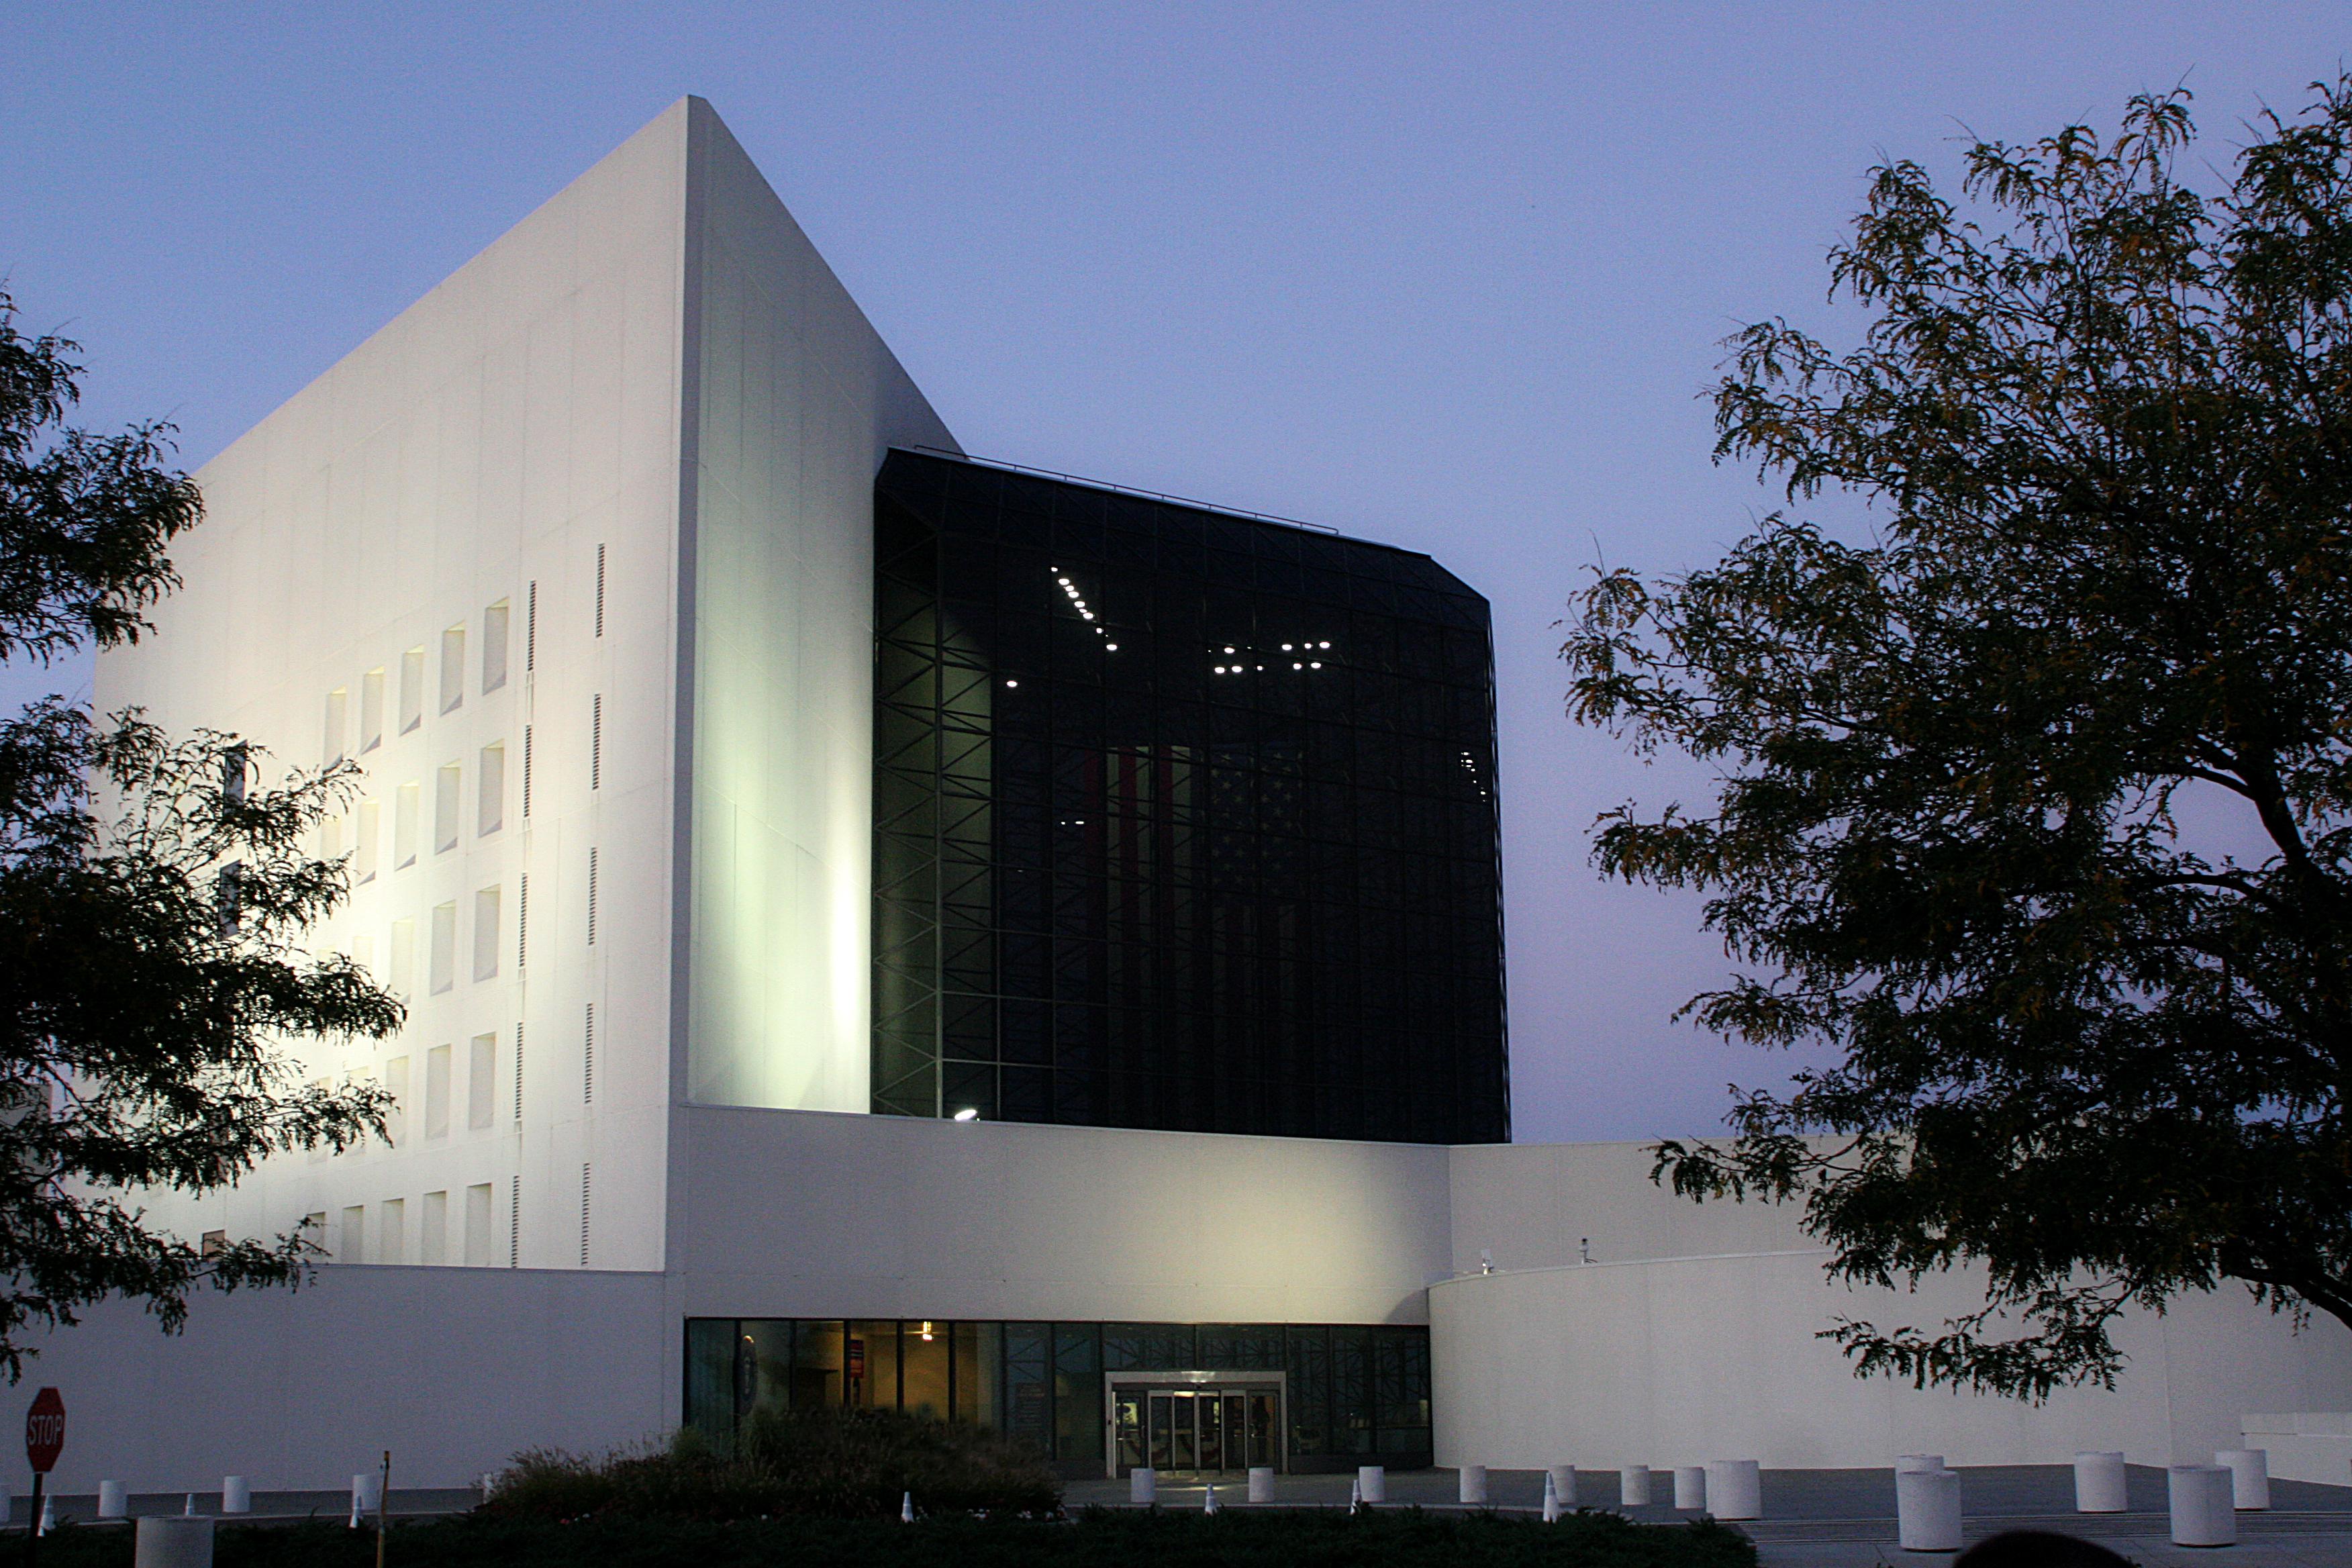 The front exterior of the JFK Library at twilight